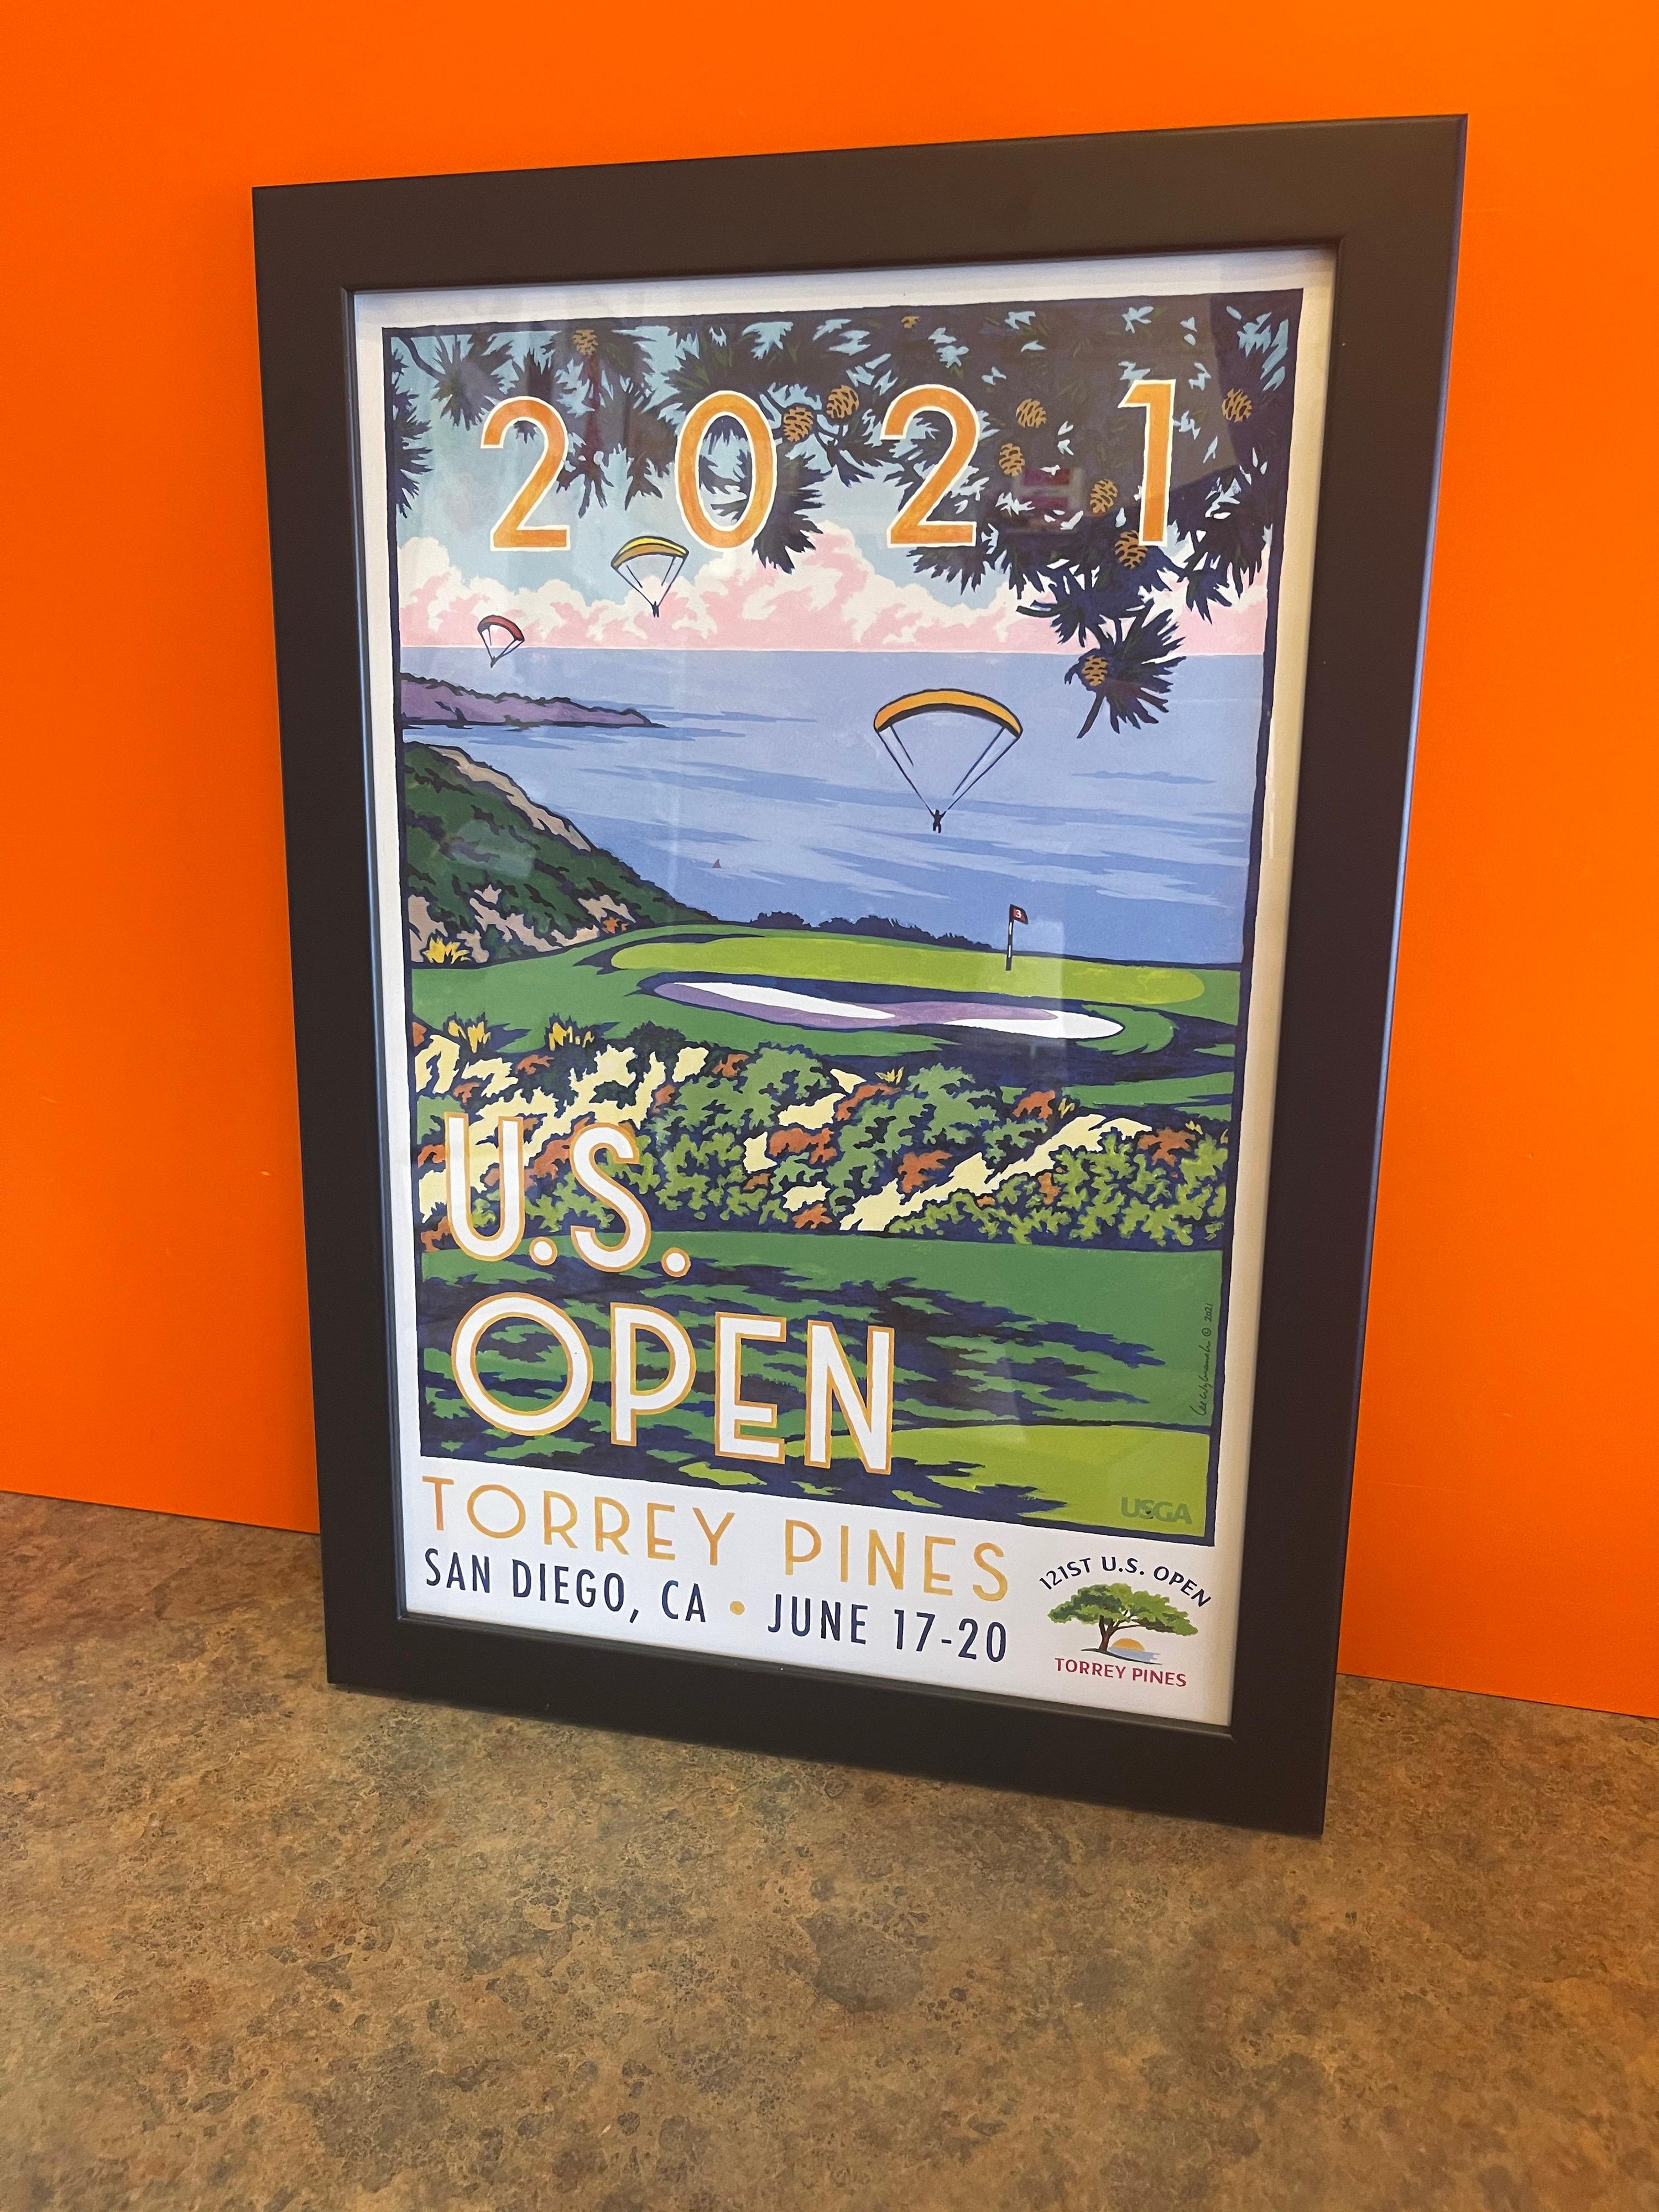 Highly collectible 2021 U.S. Open golf poster from Torrey Pines golf course in San Diego, CA by noted golf artist Lee Wybranski, circa 2021. The print is in excellent condition with vibrant color and no tears or pin holes. The pieces measures: 14